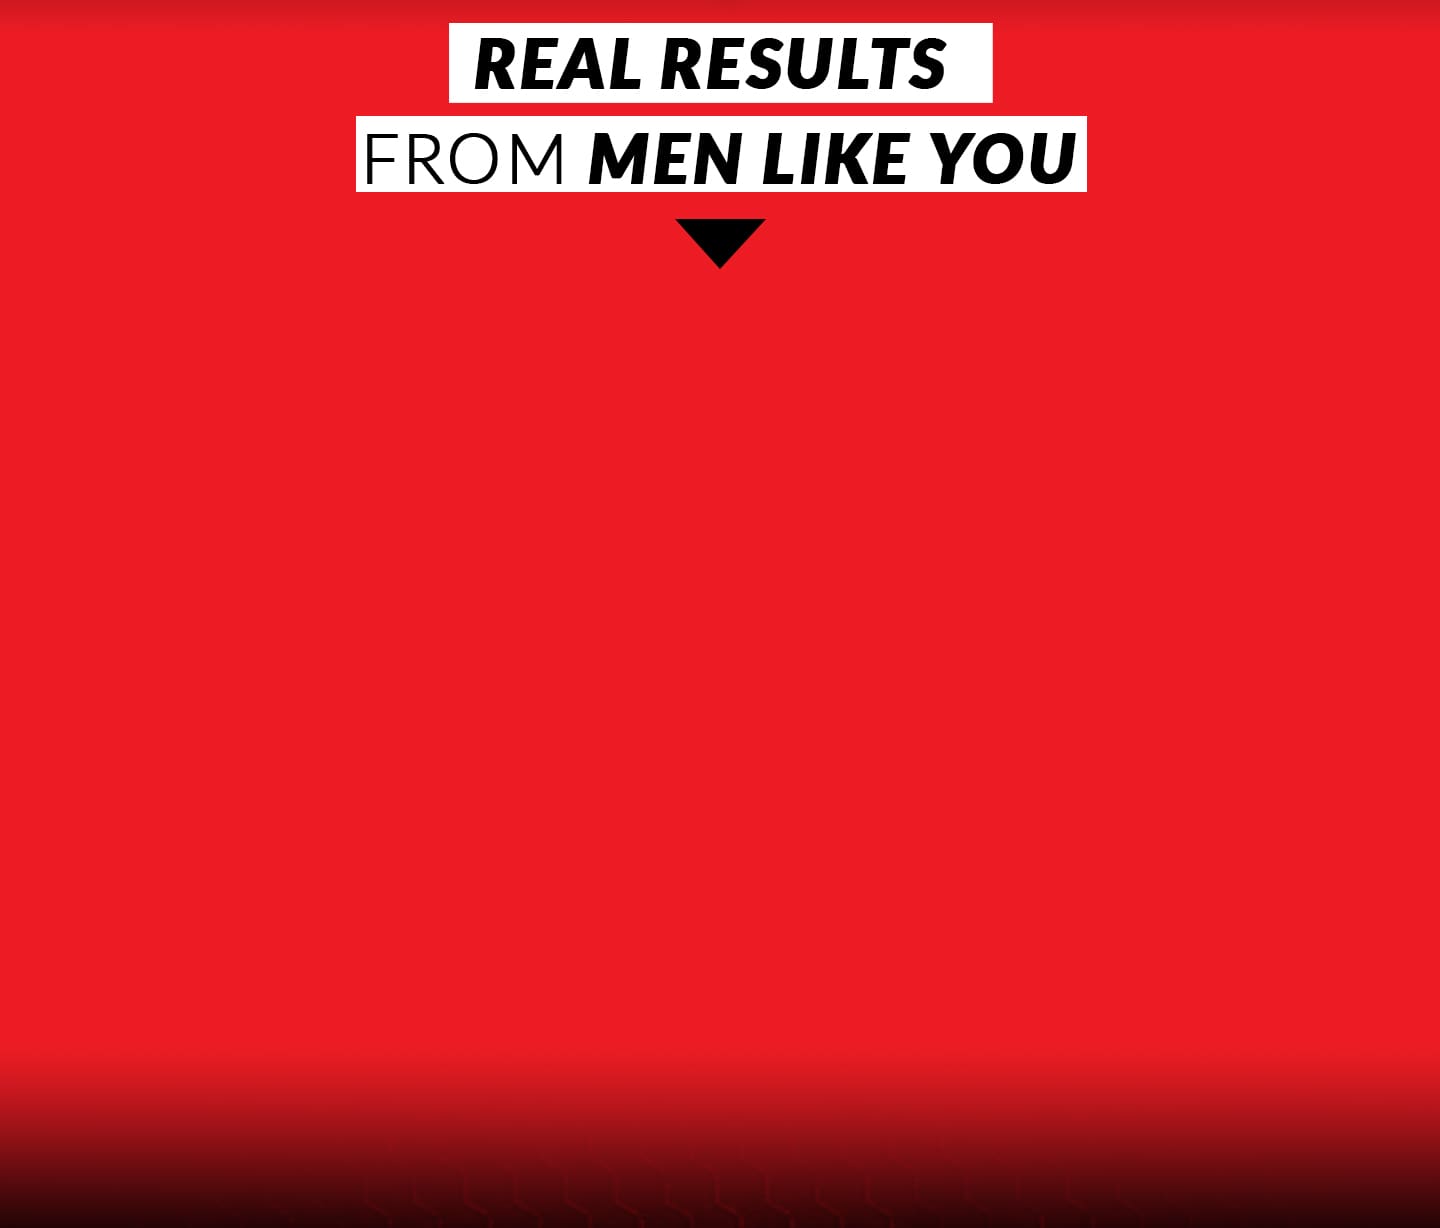 REAL RESULTS FROM MEN LIKE YOU